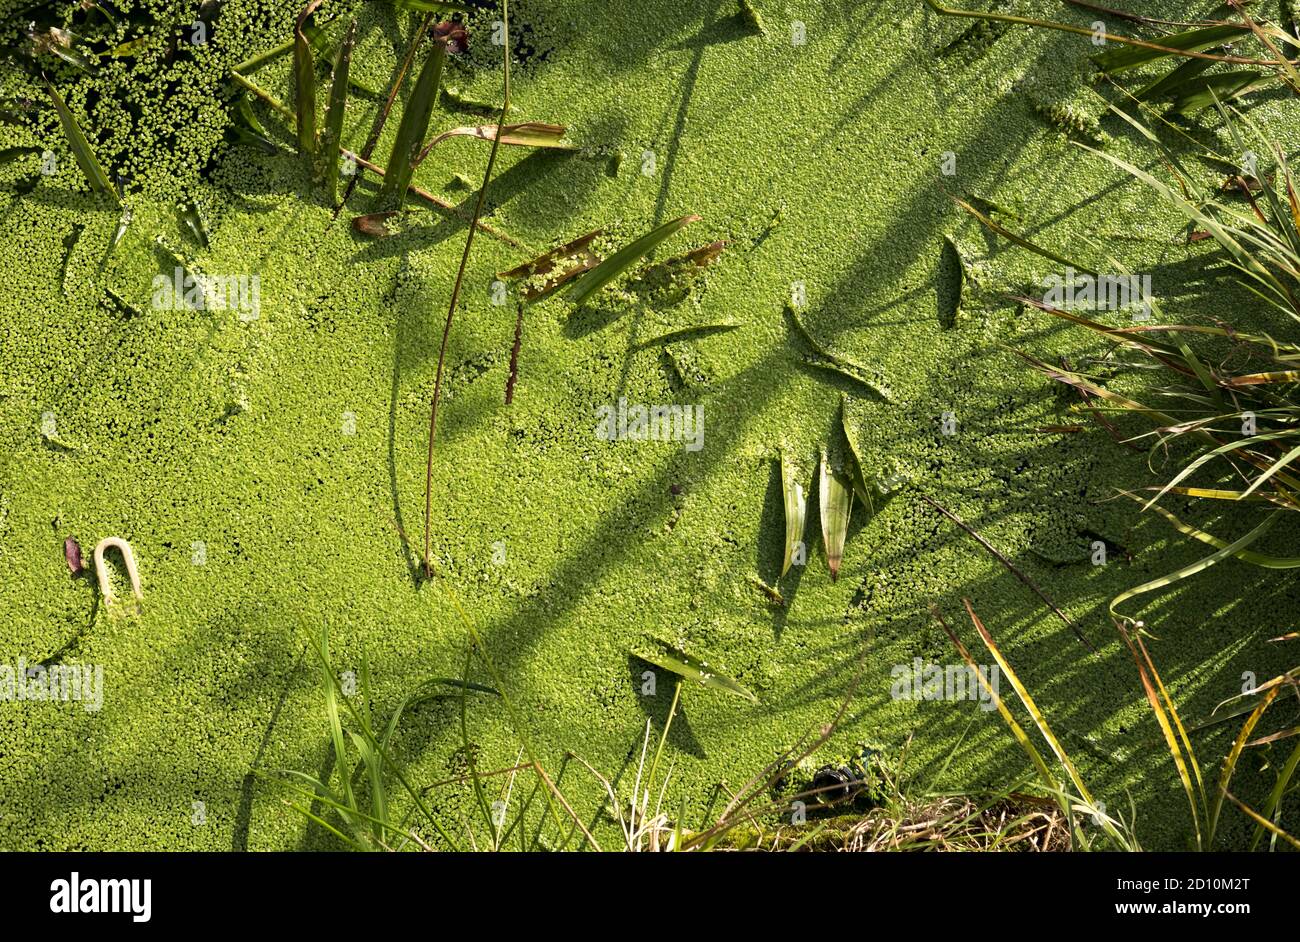 Small garden pond covered in duckweed Stock Photo